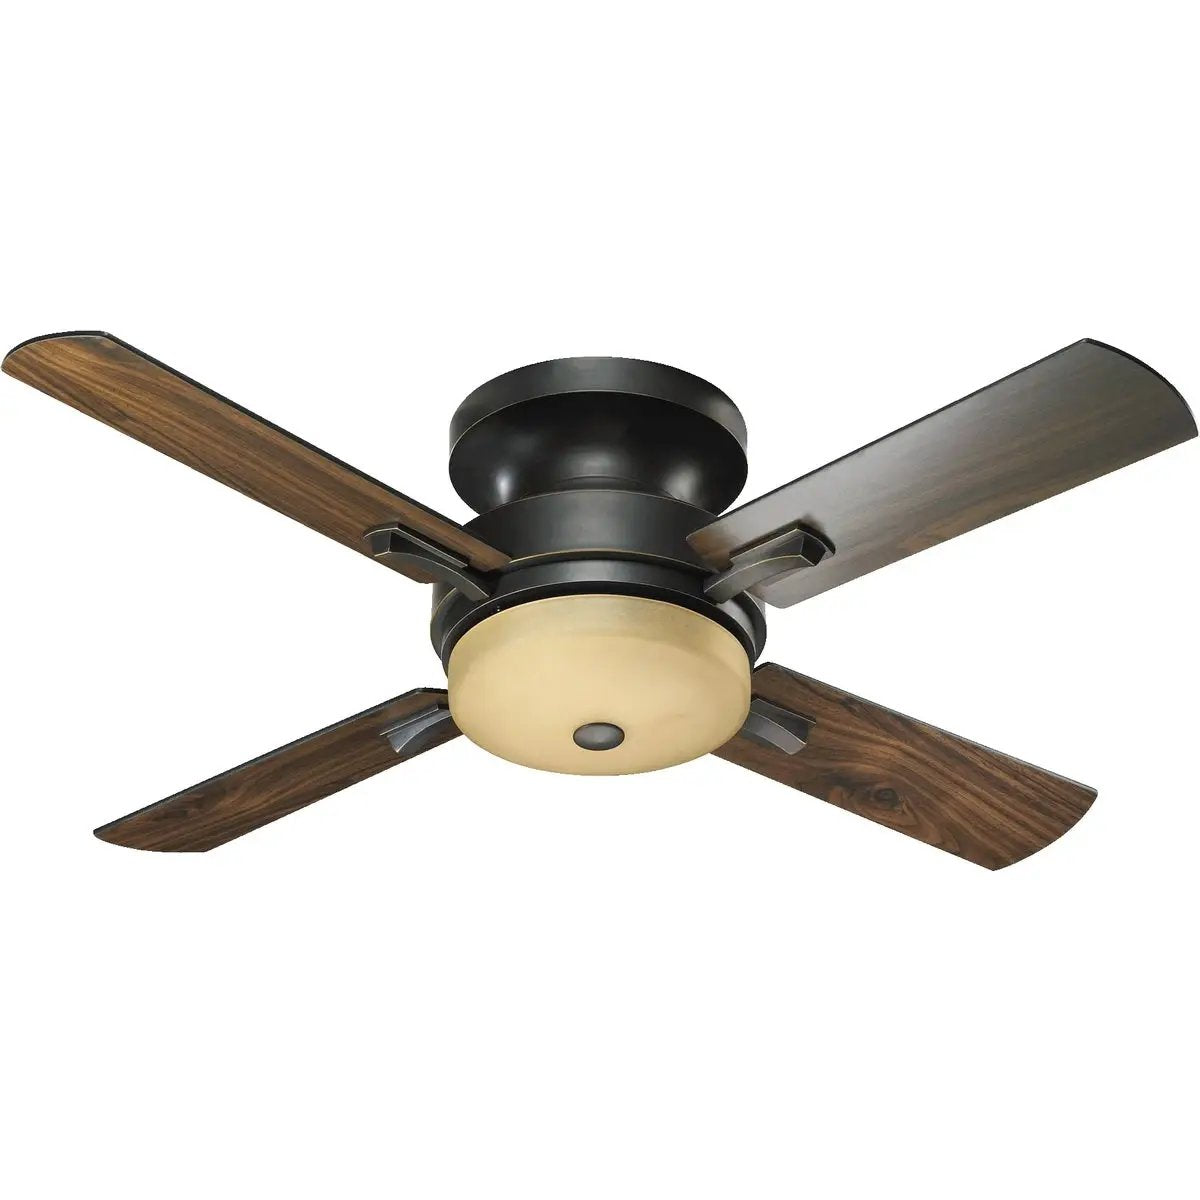 A Quorum International Flush Mount Ceiling Fan with Light, featuring slightly curved blades and inconspicuous housing. Effortlessly provides cooling comfort with a 52&quot; sweep, perfect for areas with less overhead clearance. Includes 3 LED lamps and a light kit with a maximum wattage of 13.5 Watts. UL Listed for dry locations. Limited Lifetime warranty.